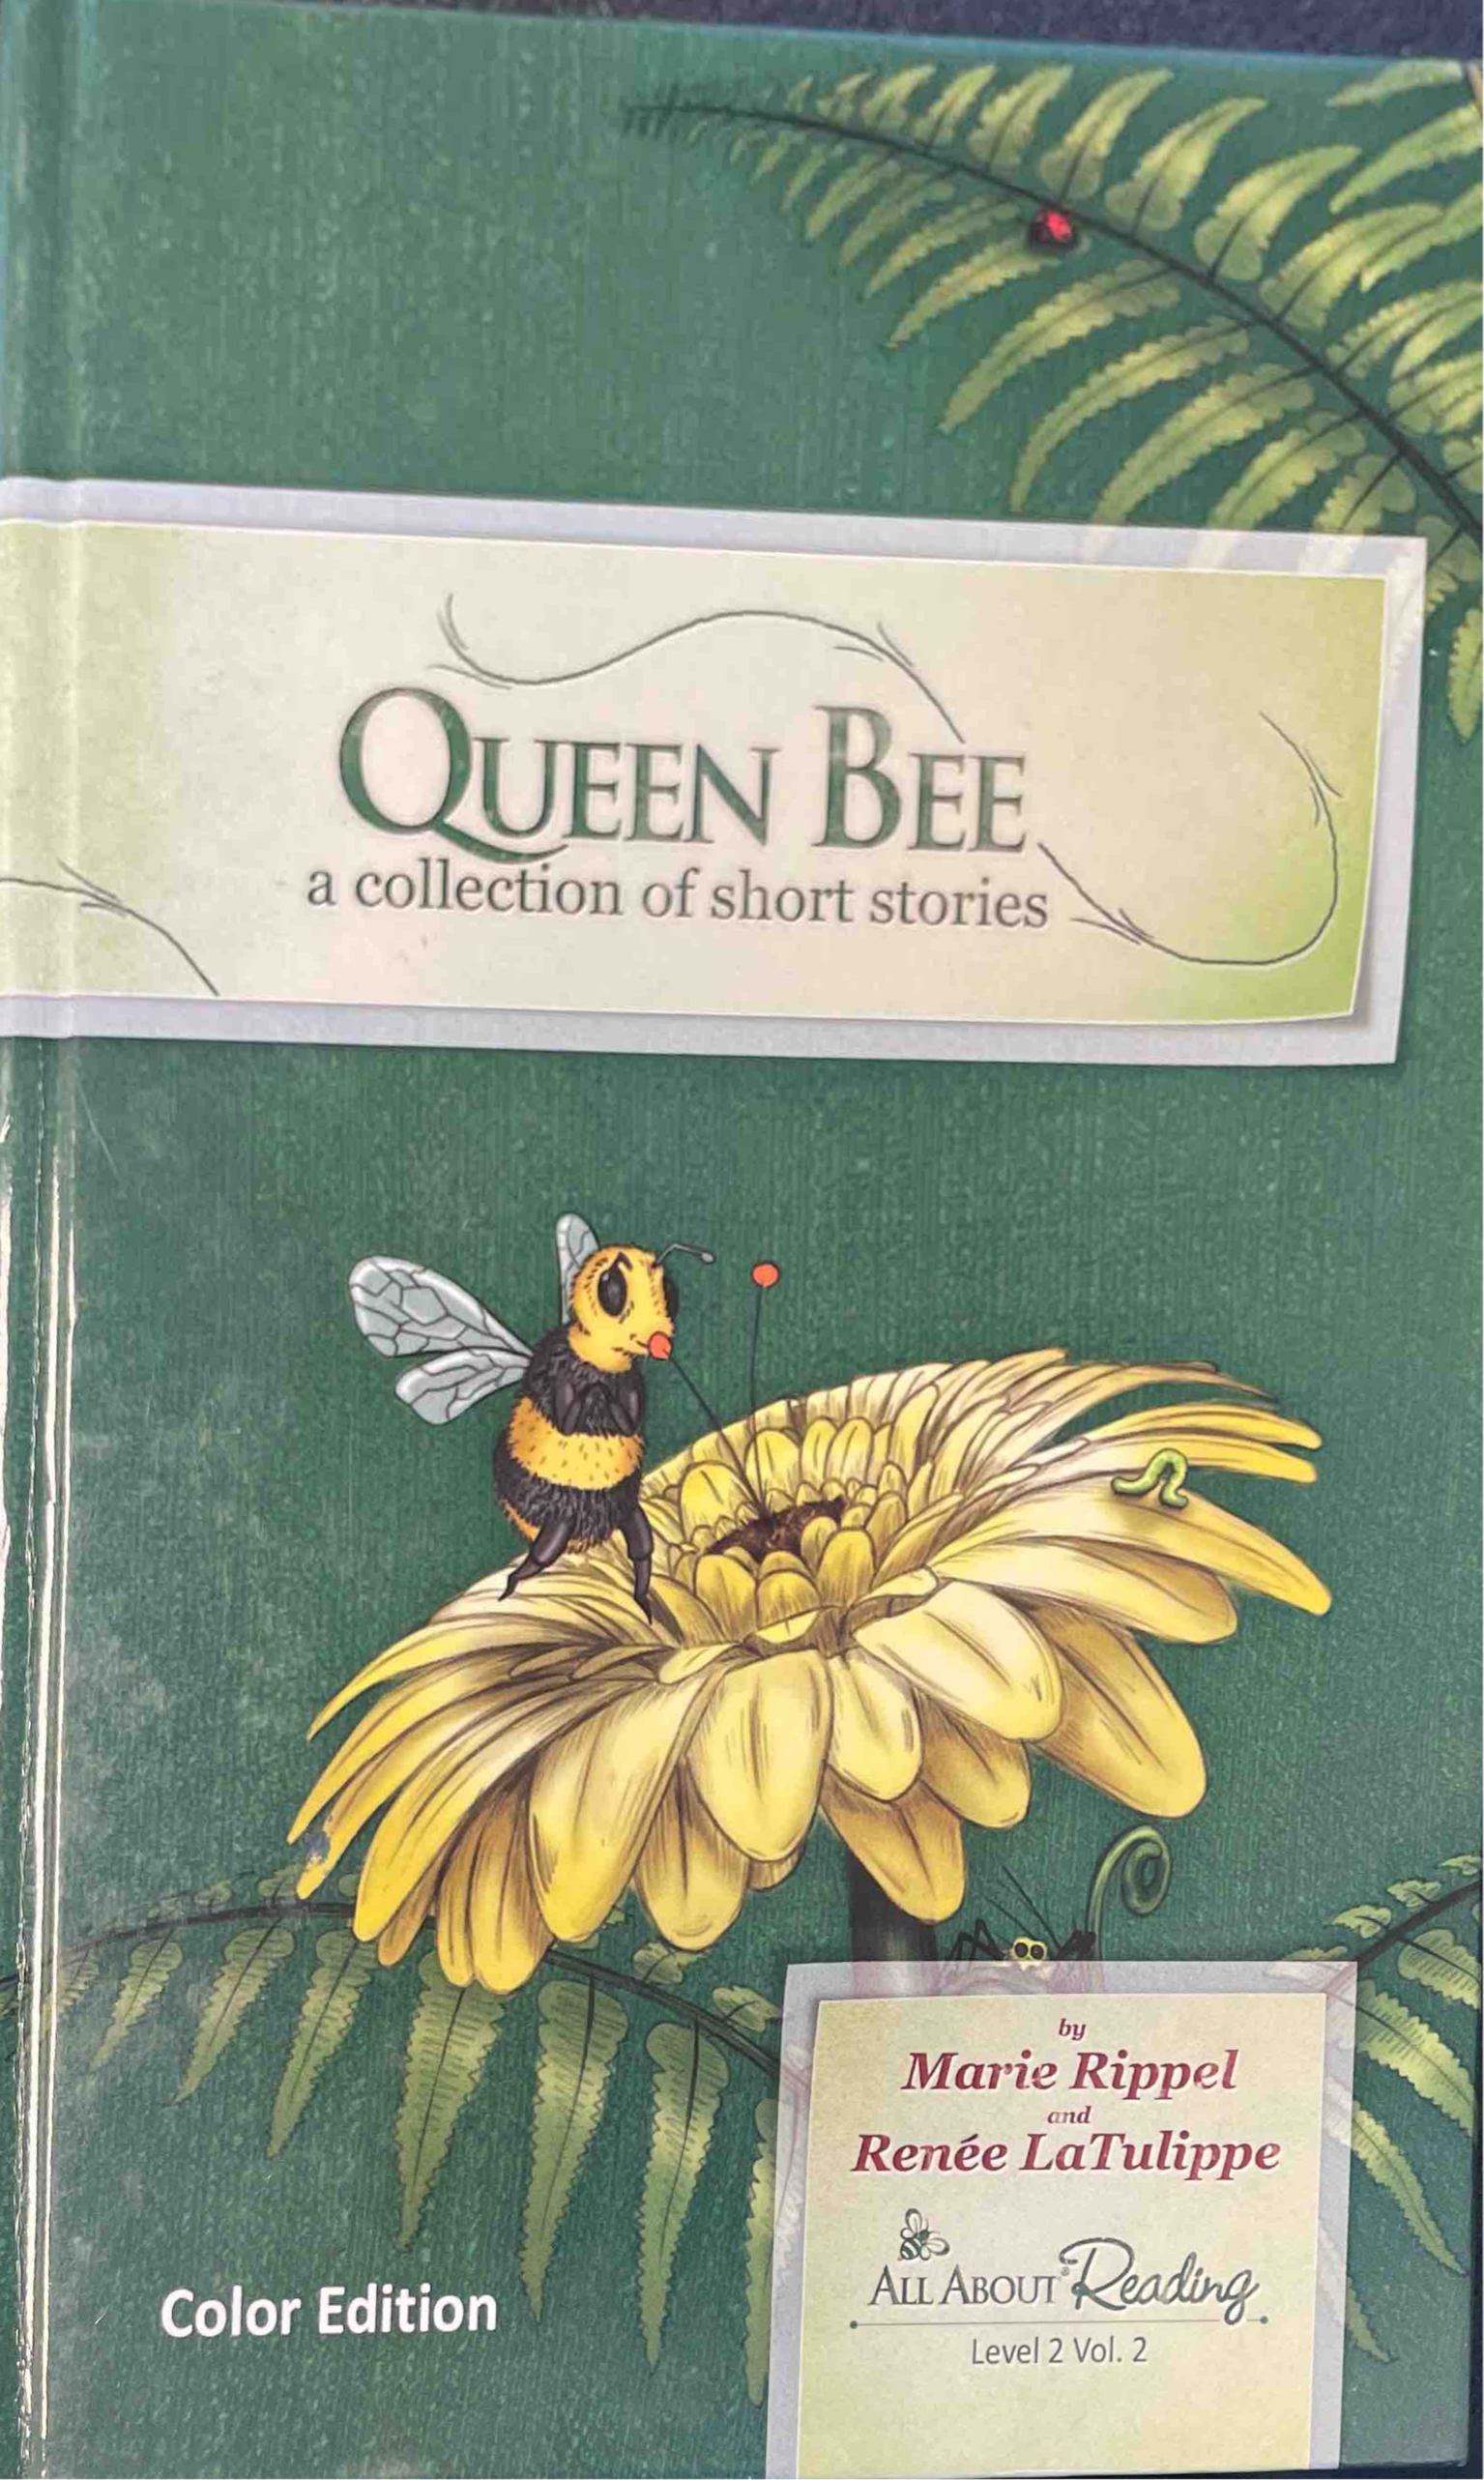 All About Reading - Queen Bee : Level 2, Volume 2